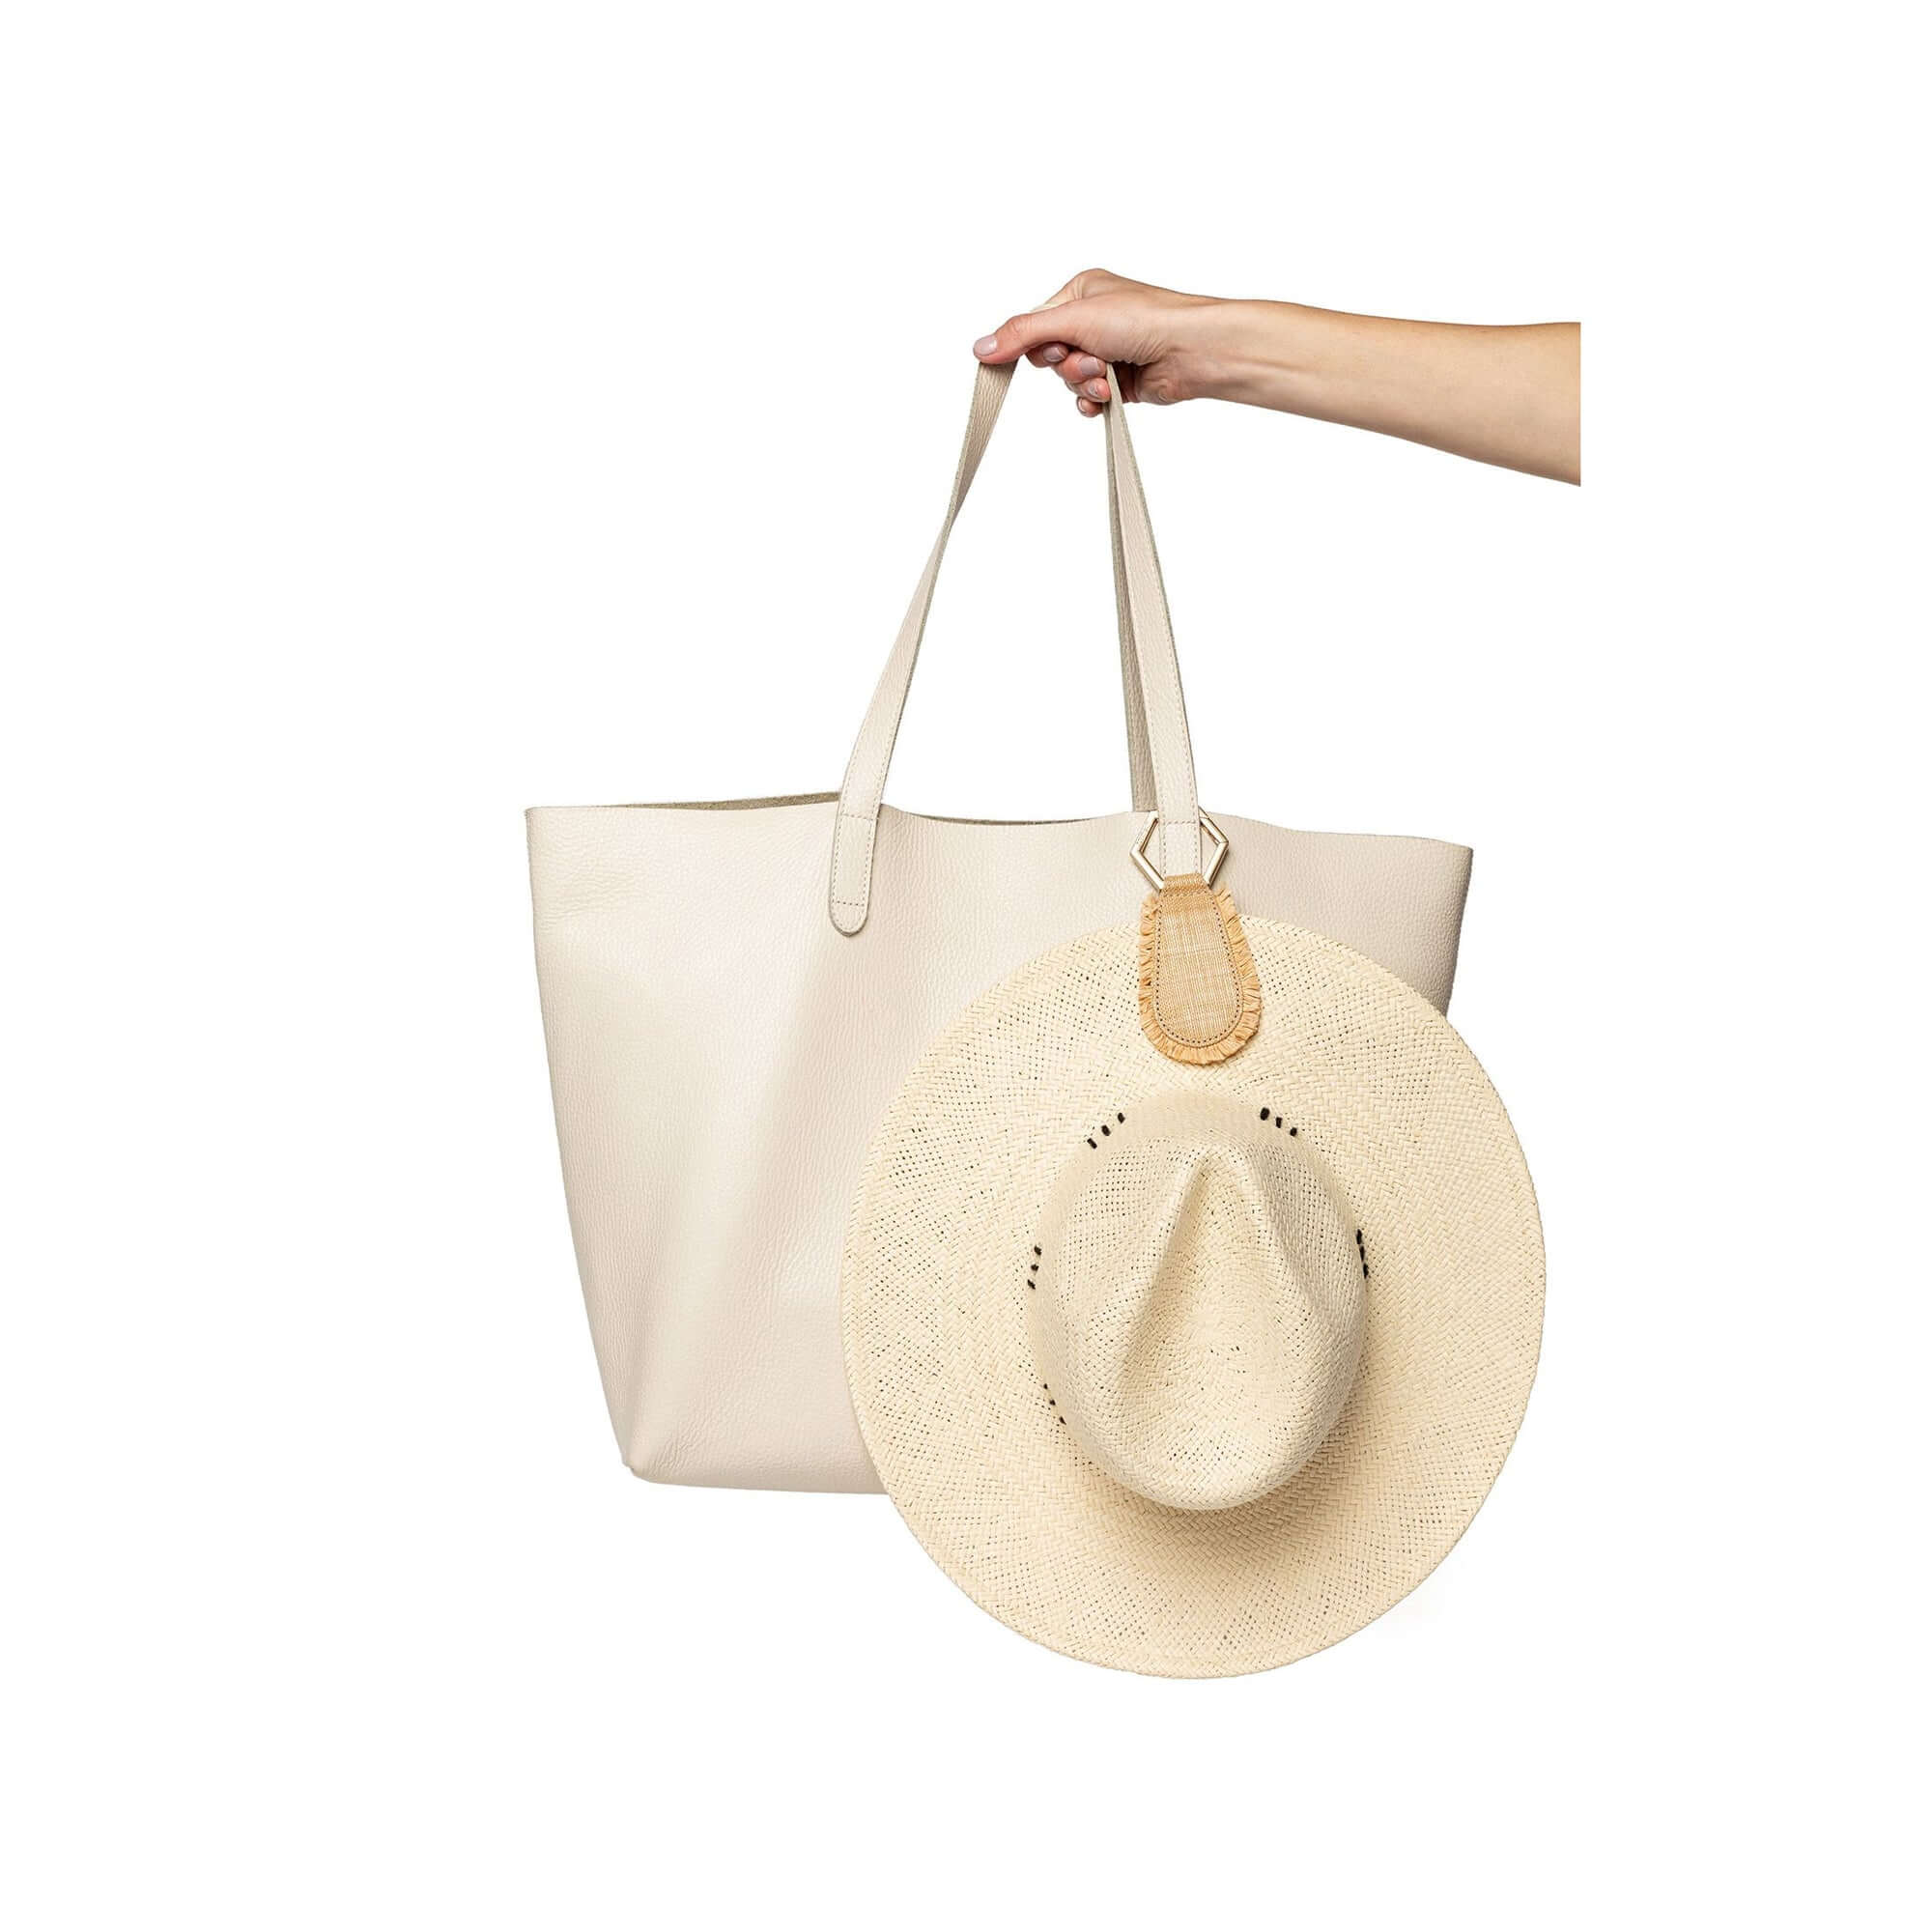 The fray TOPTOTE magnetic hat clip in natural raffia attaches to your bag and allows you to travel with your hat hands free.